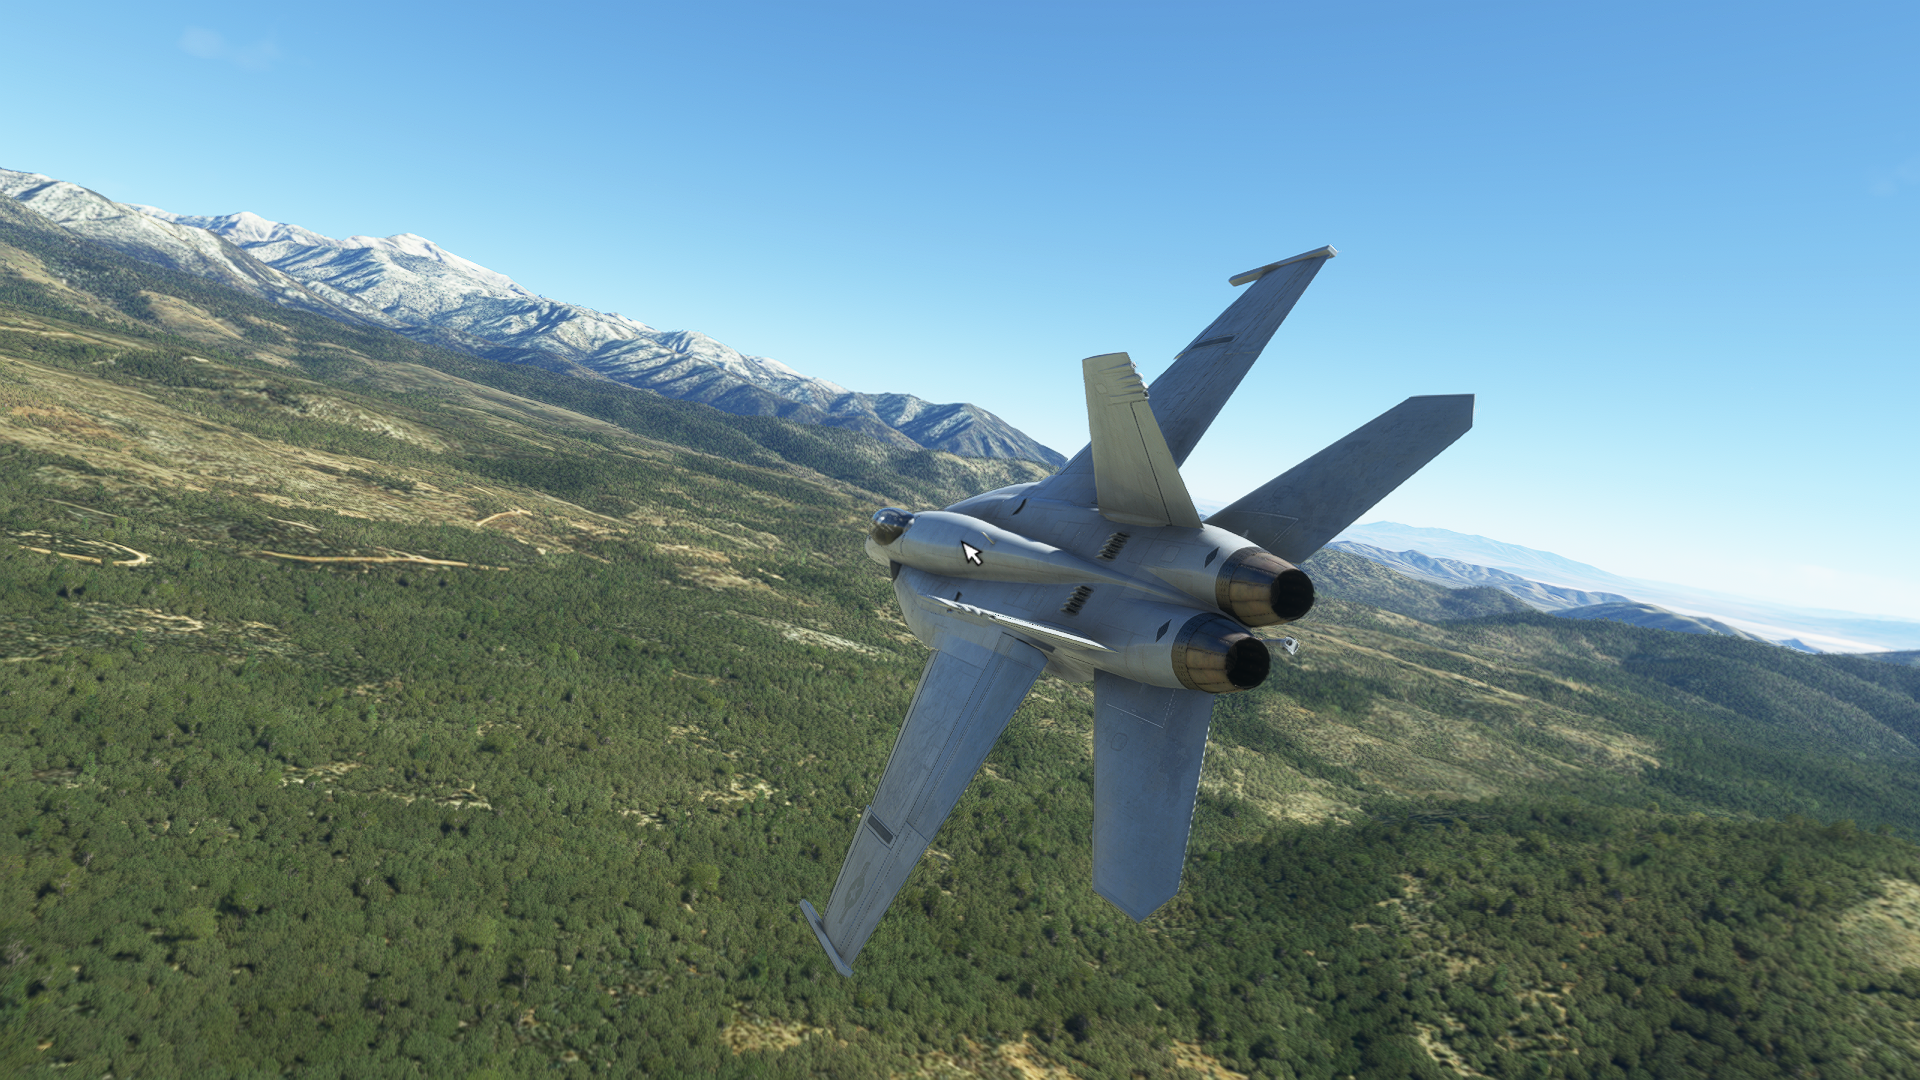 I Spent $250 on MSFS Military Jets So You Don't Have To - Editorial, Microsoft Flight Simulator